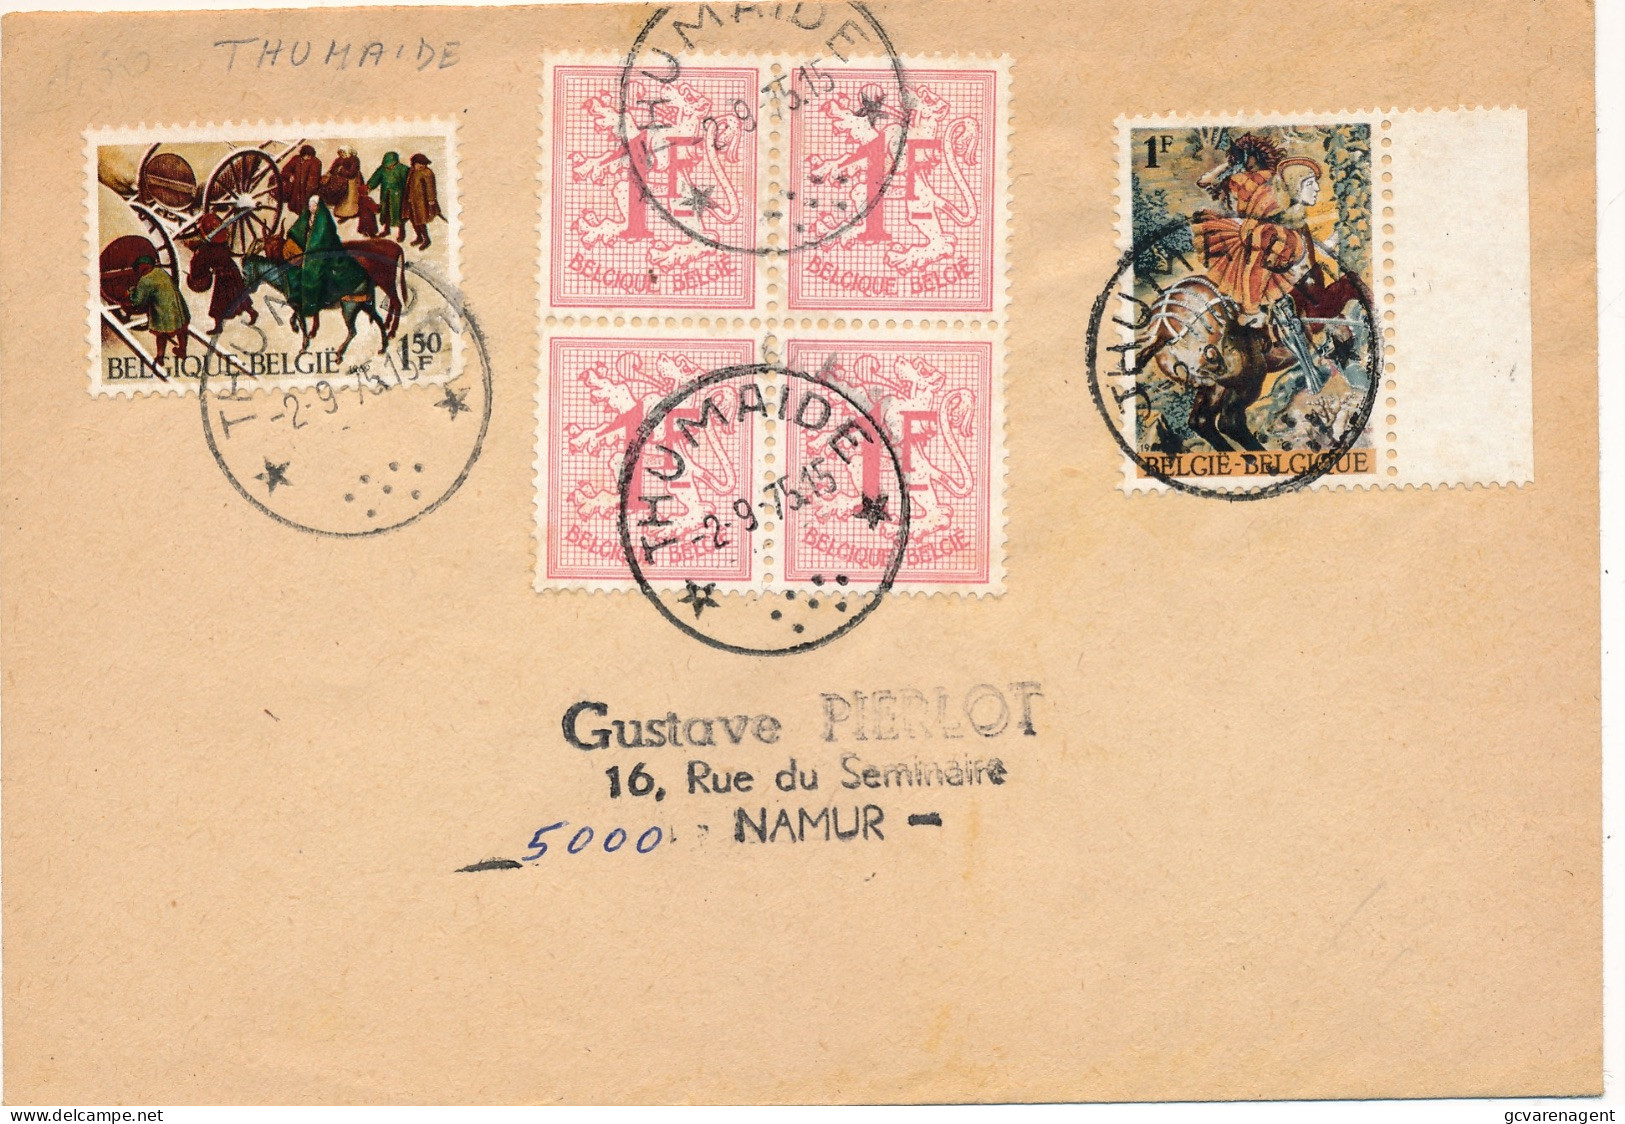 ENVELOPPE 1975   CACHET  THUMAIDE          2 SCANS - Lettres & Documents